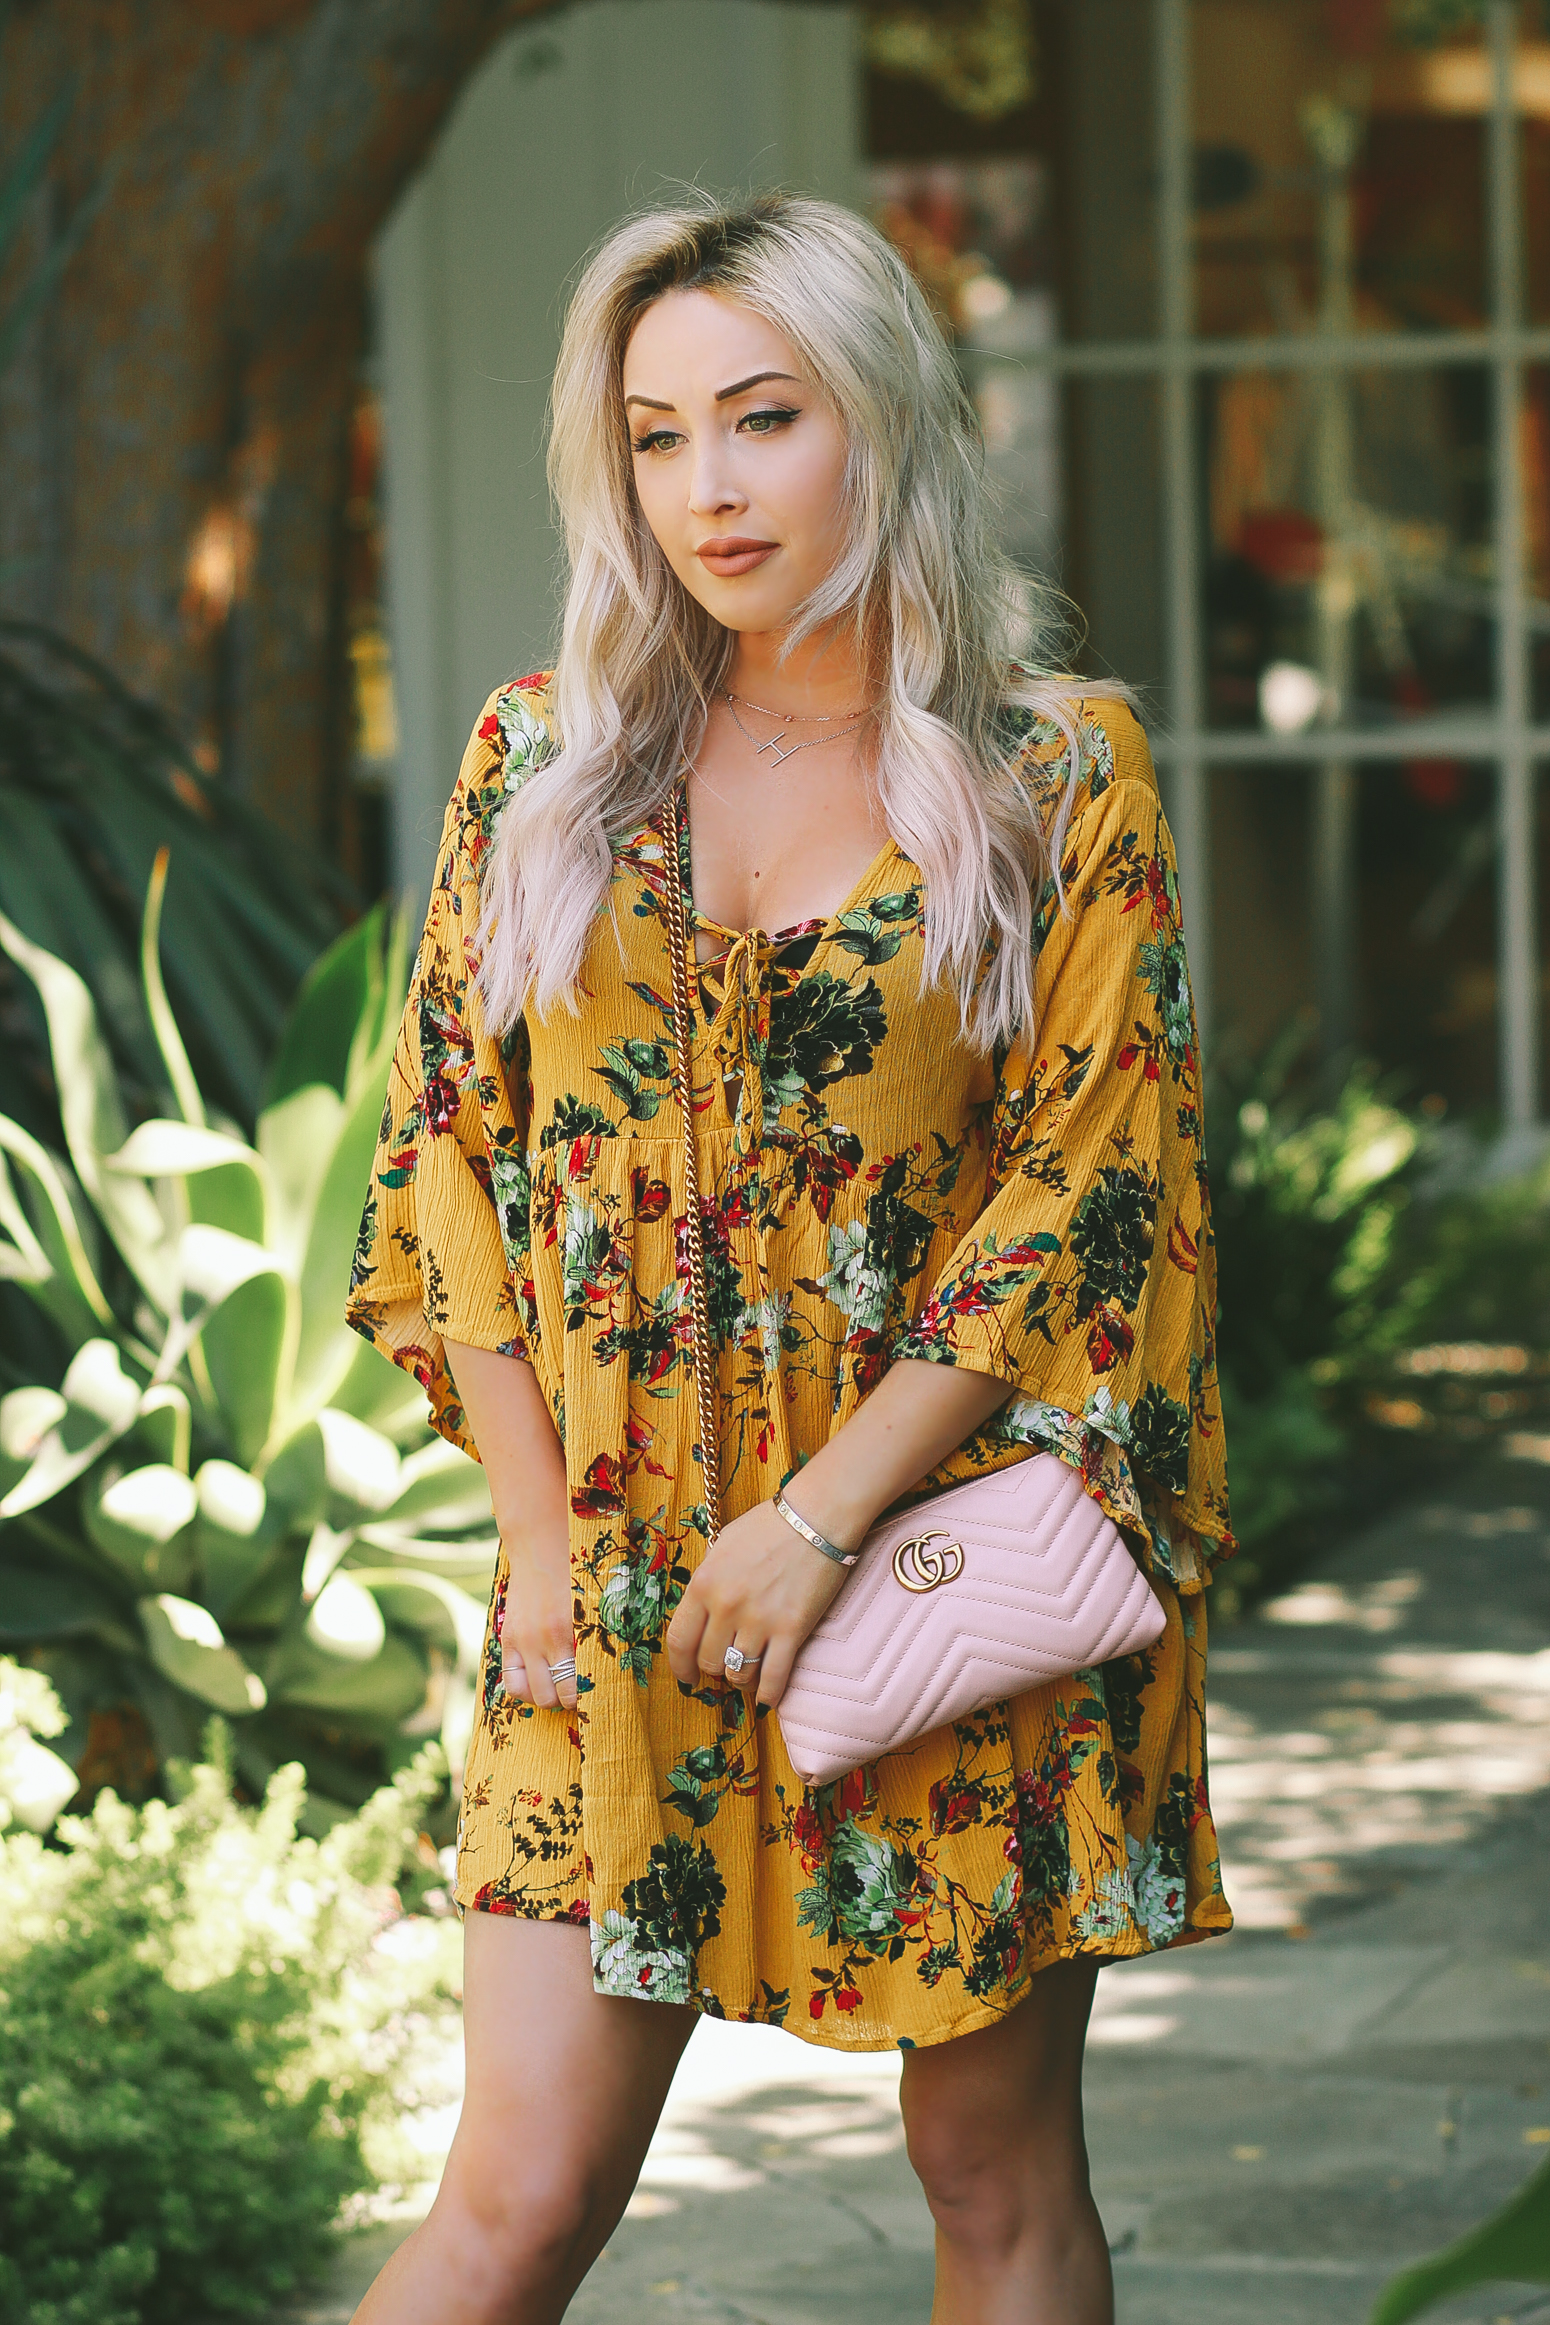 Blondie in the City | Mustard Yellow & A Pink Gucci Bag